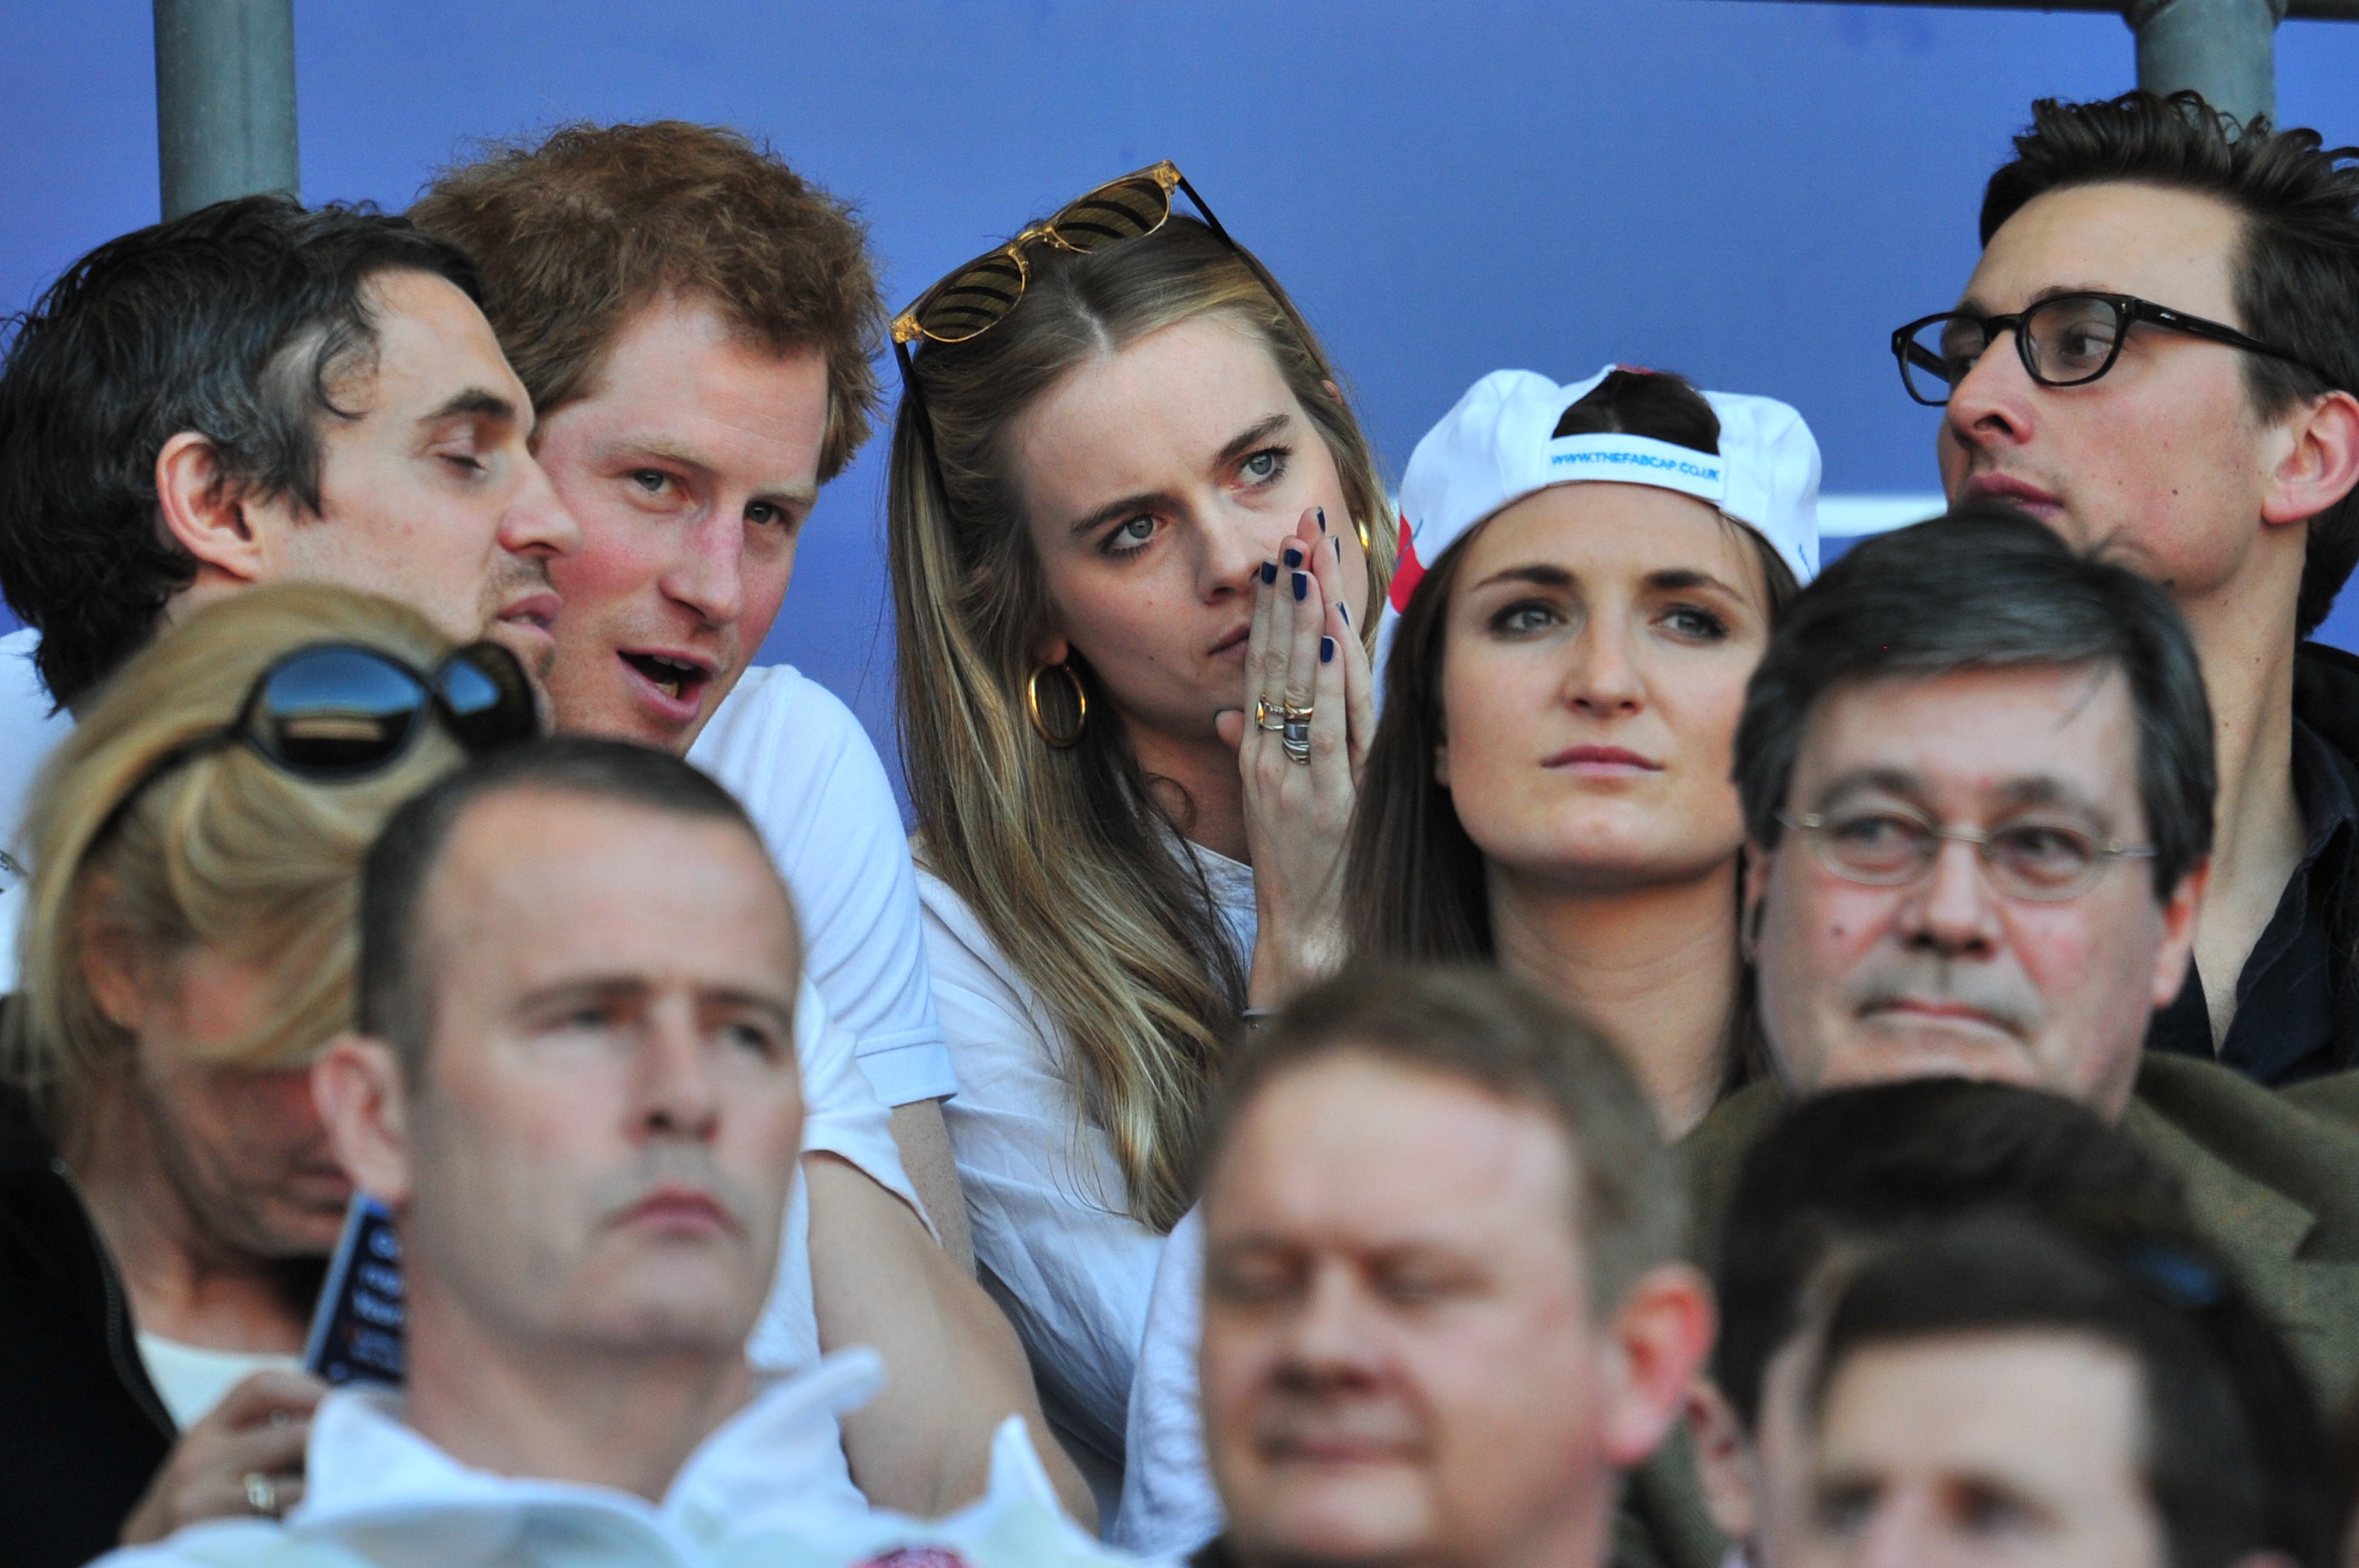 Prince Harry and Cressida Bonas watch the match during the Six Nations International rugby Union match at Twickenham on March 9, 2014 in London. | Source: Getty Images